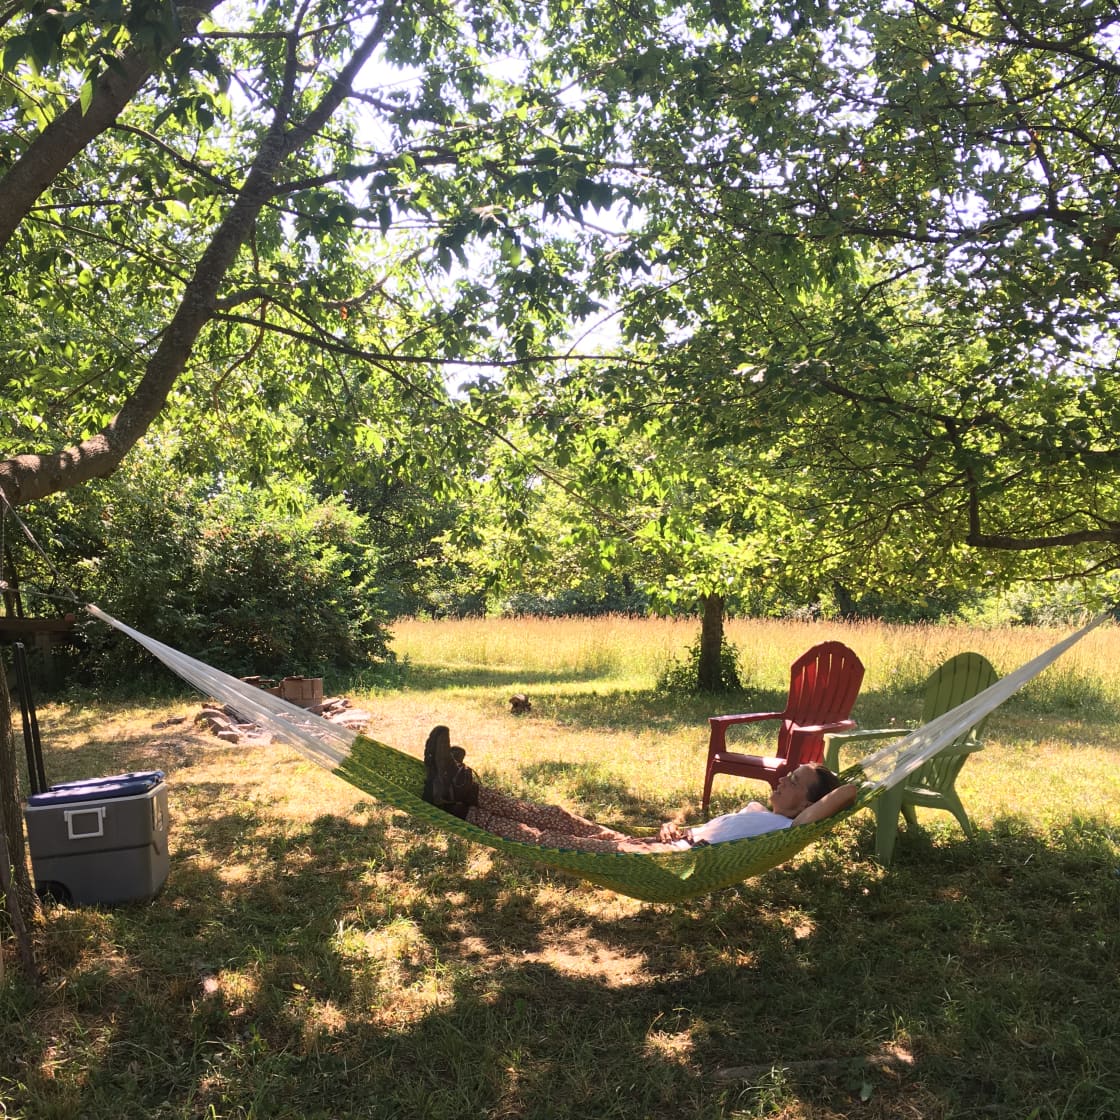 Our bee keeper relaxing at the campsite (BYO hammock)